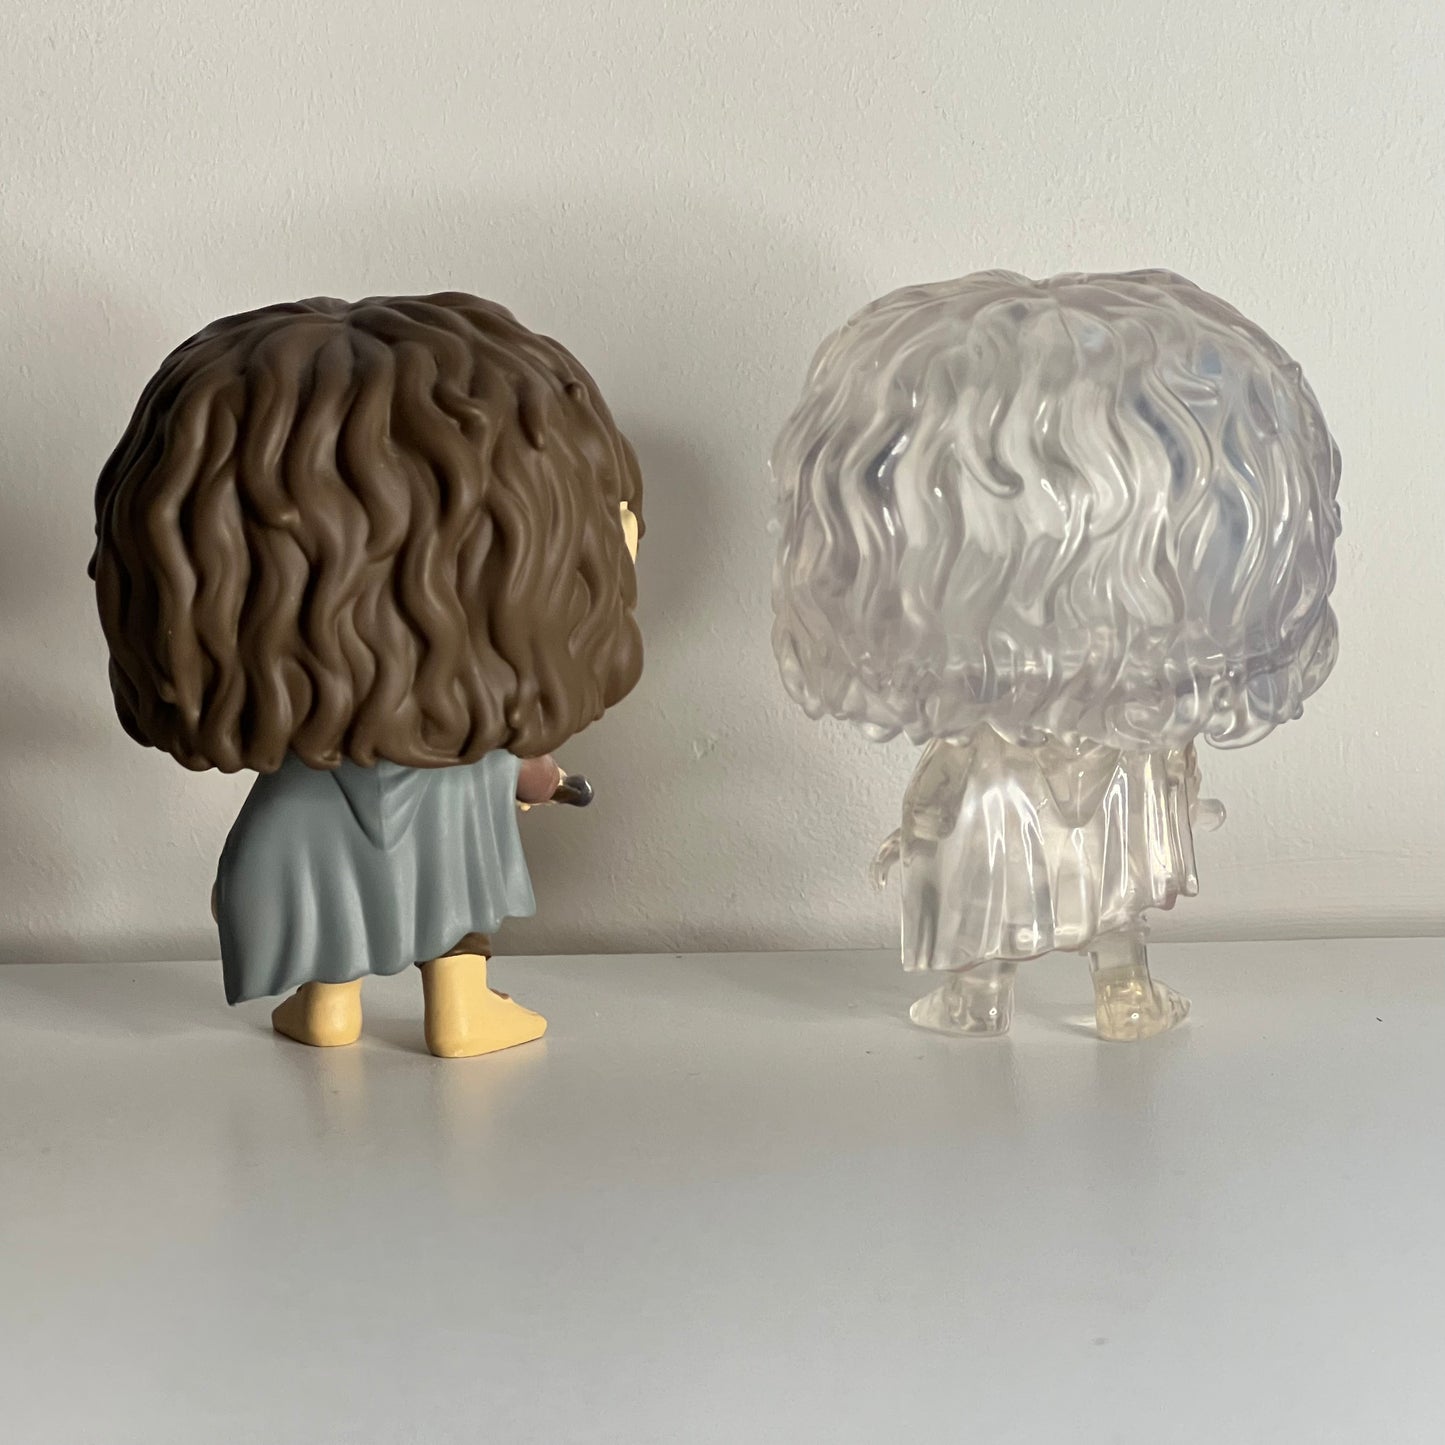 The Lord of the Rings - Frodo Baggins & Invisible Frodo Baggins 444 Funko Pops (No Box or Insert Included)